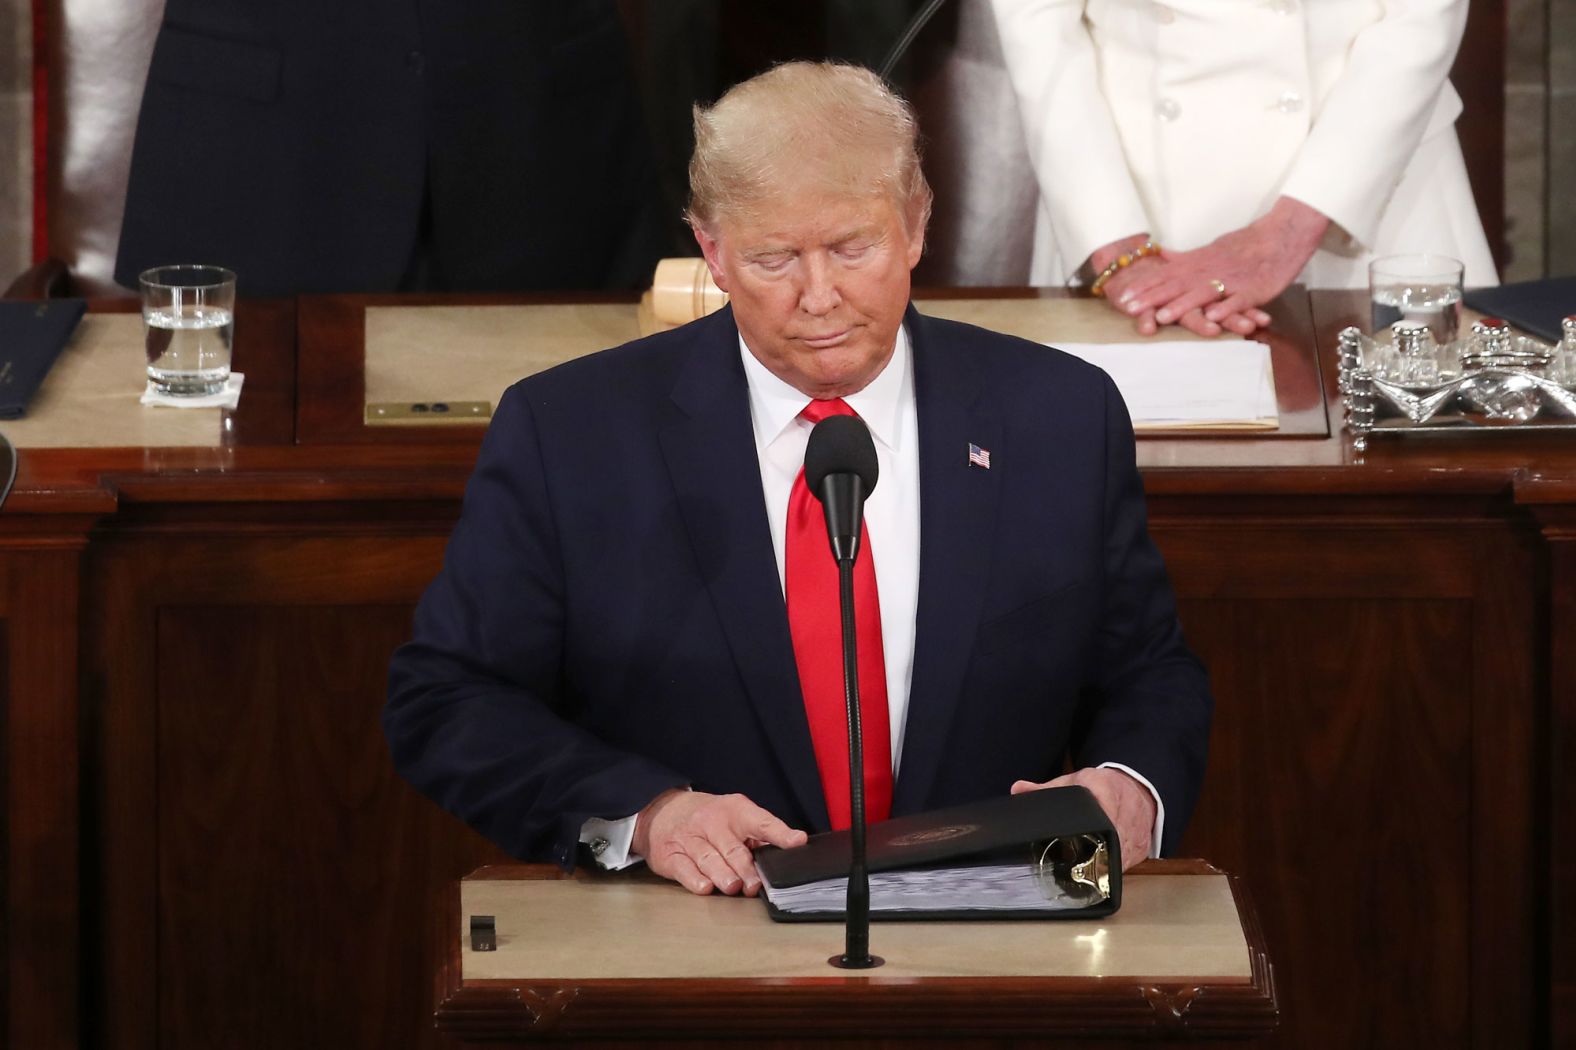 Trump prepares to start his address. He delivered a speech heavy on themes he hopes will fuel his reelection in November. 